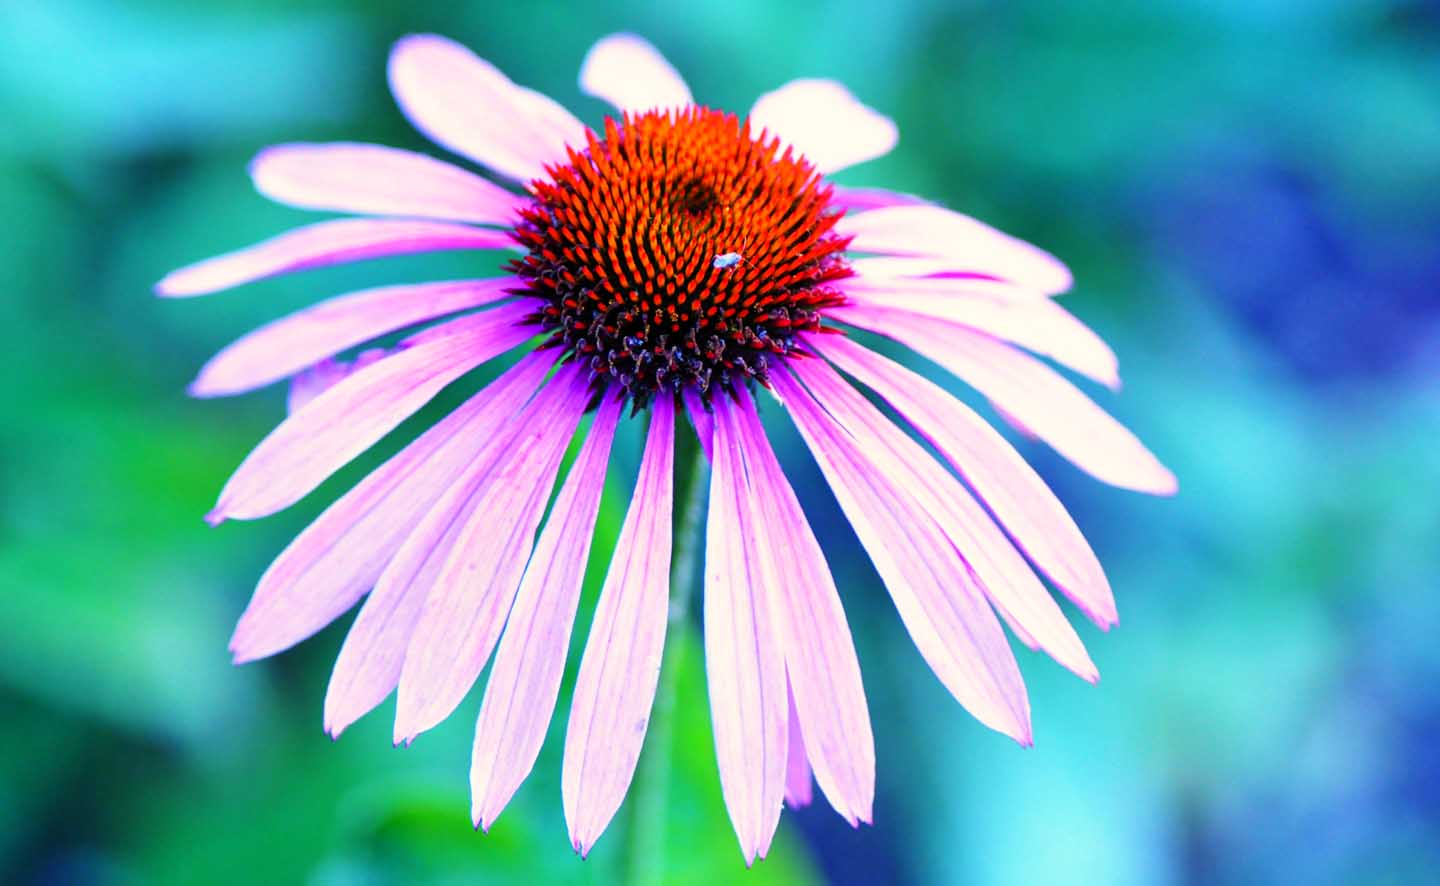 An Echinacea flower - Photo by Mabel Amber from Pexels
